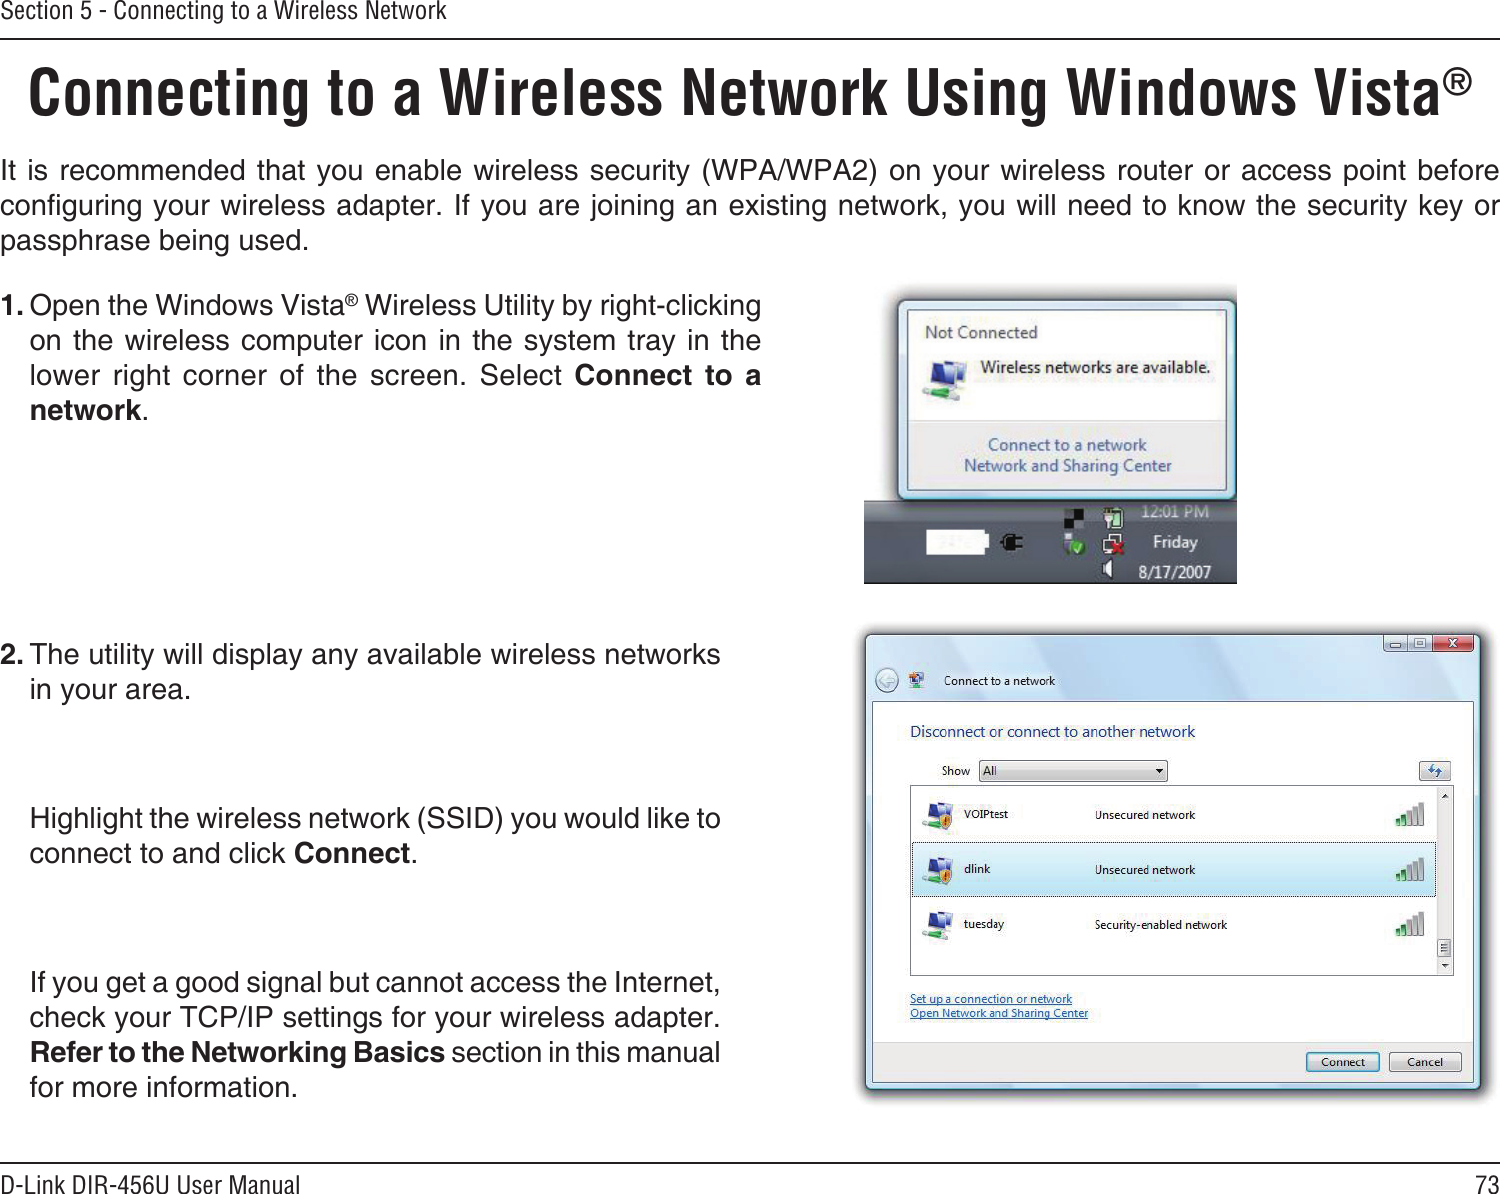 73D-Link DIR-456U User ManualSection 5 - Connecting to a Wireless NetworkConnecting to a Wireless Network Using Windows Vista® It is recommended that you enable wireless security (WPA/WPA2) on your wireless router or access point before conguring your wireless adapter. If you are joining an existing network, you will need to know the security key or passphrase being used.2. The utility will display any available wireless networks in your area.  Highlight the wireless network (SSID) you would like to connect to and click Connect.  If you get a good signal but cannot access the Internet, check your TCP/IP settings for your wireless adapter. Refer to the Networking Basics section in this manual for more information.1. Open the Windows Vista® Wireless Utility by right-clicking on the wireless computer icon in the system tray in the lower  right  corner  of  the  screen.  Select  Connect  to  a network. 